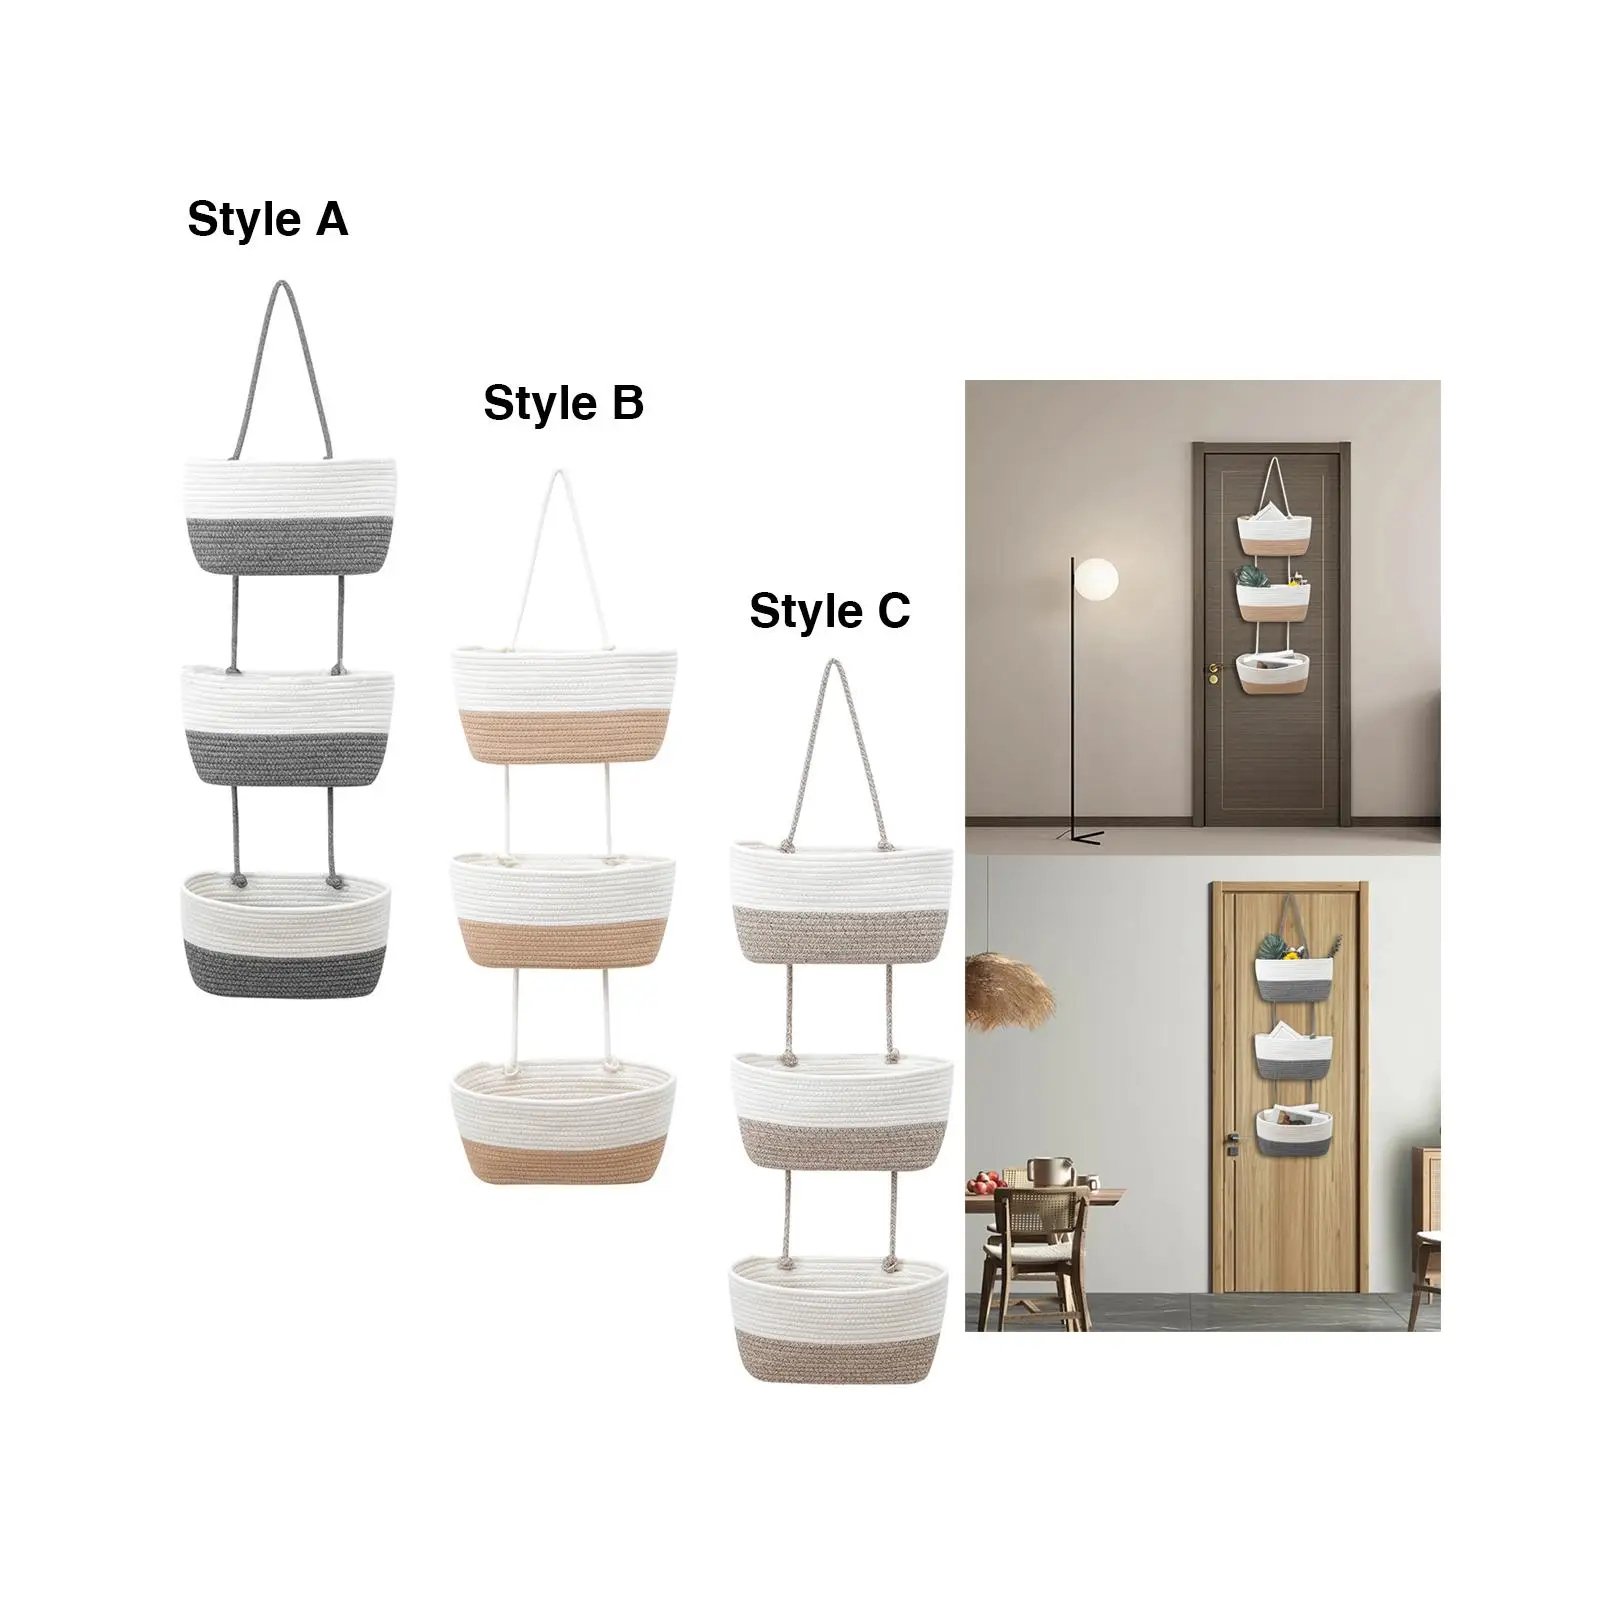 Three Tiers over The Door Fruit and Vegetable Storage Hand Woven Hanging Basket Wall Mount Organizer for Nursery Kitchen Holder